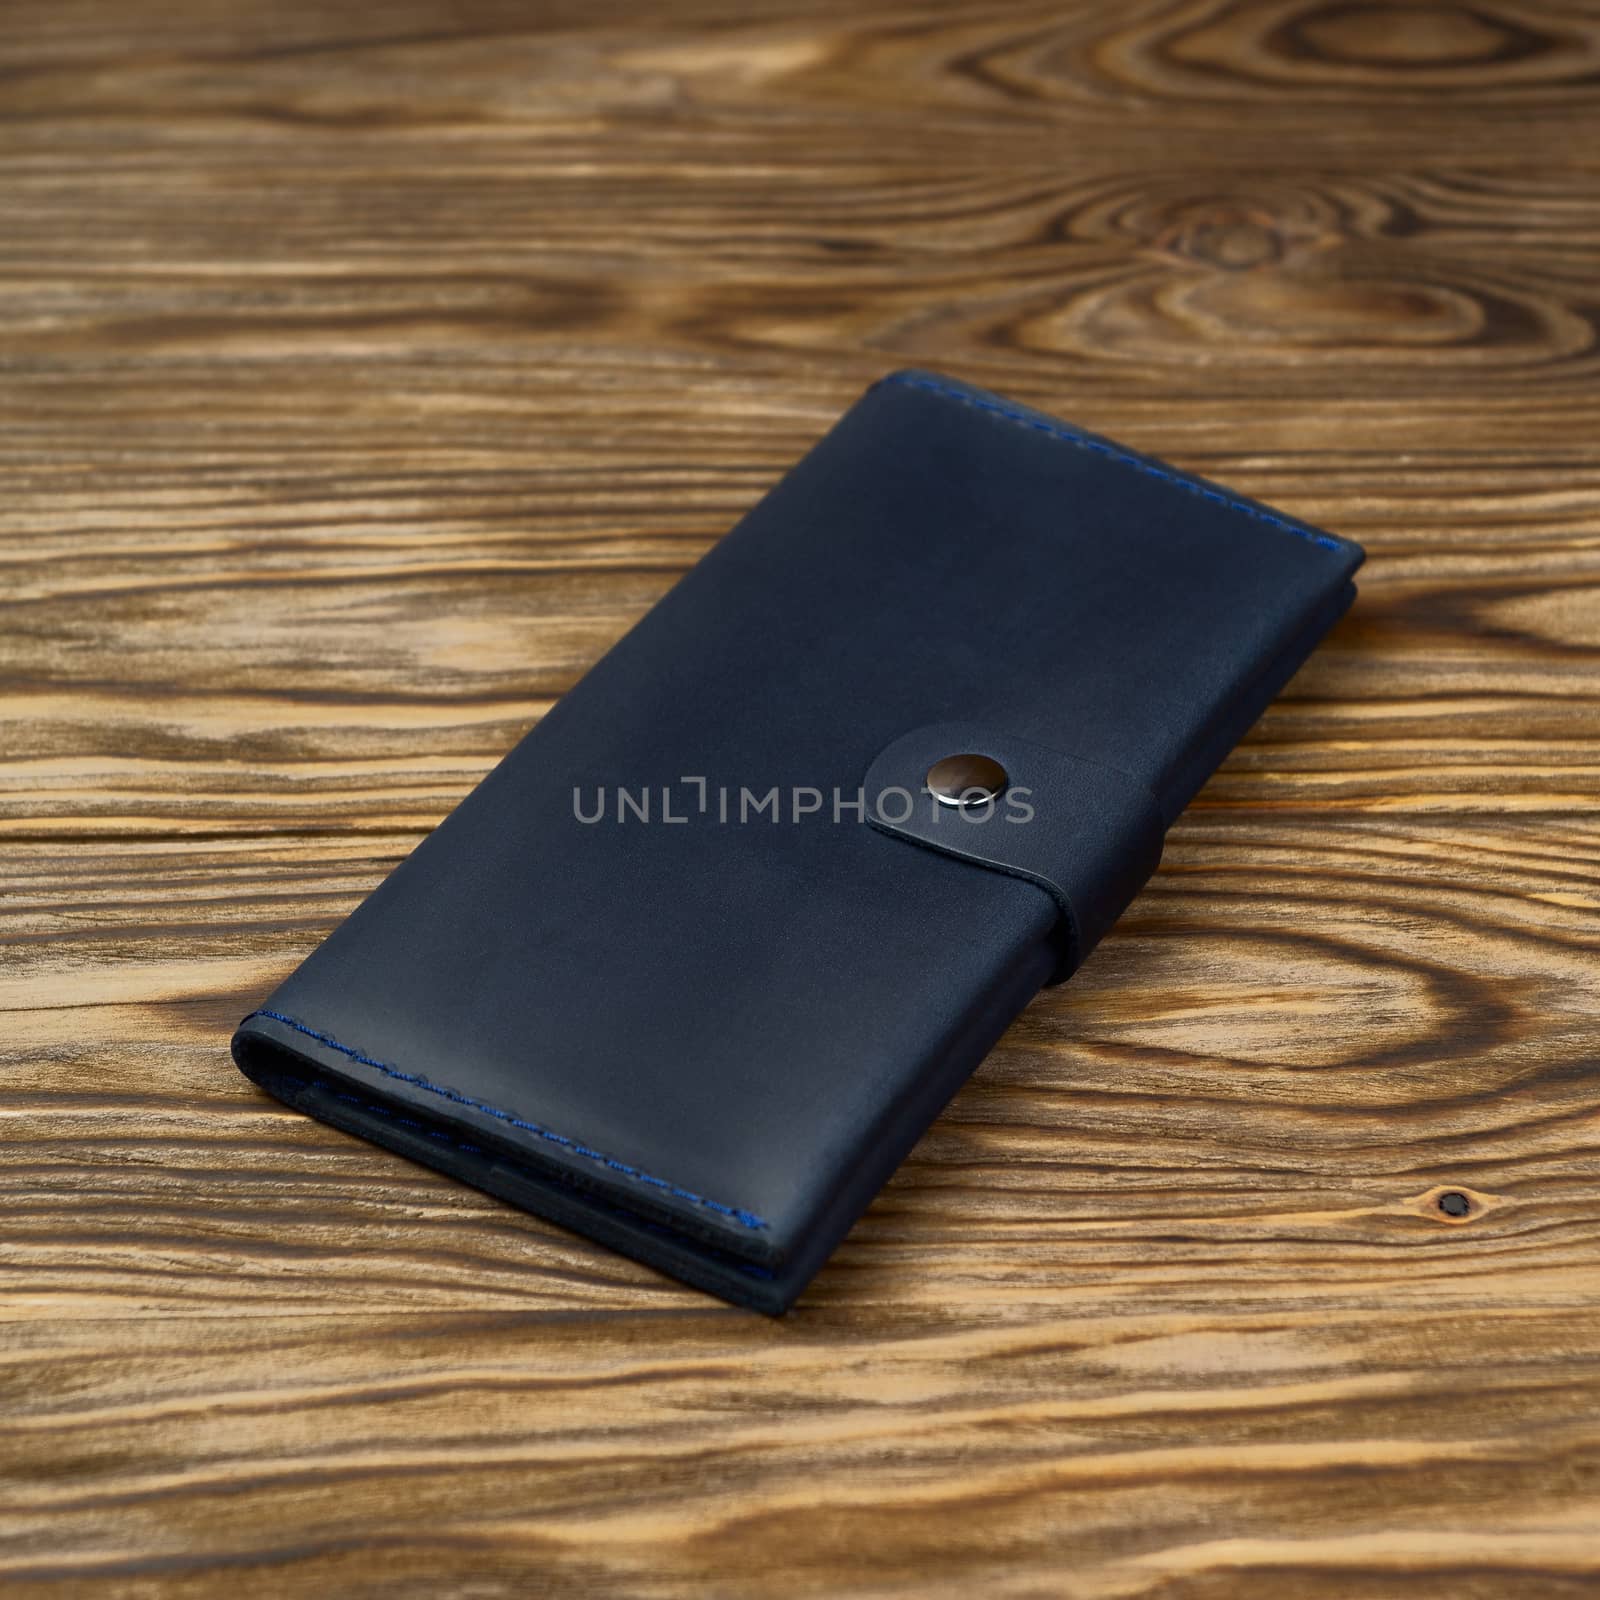 Dark blue color handmade leather wallet on textured wooden background. Wallet is unisex. Side view. Stock photo of luxury accessories.